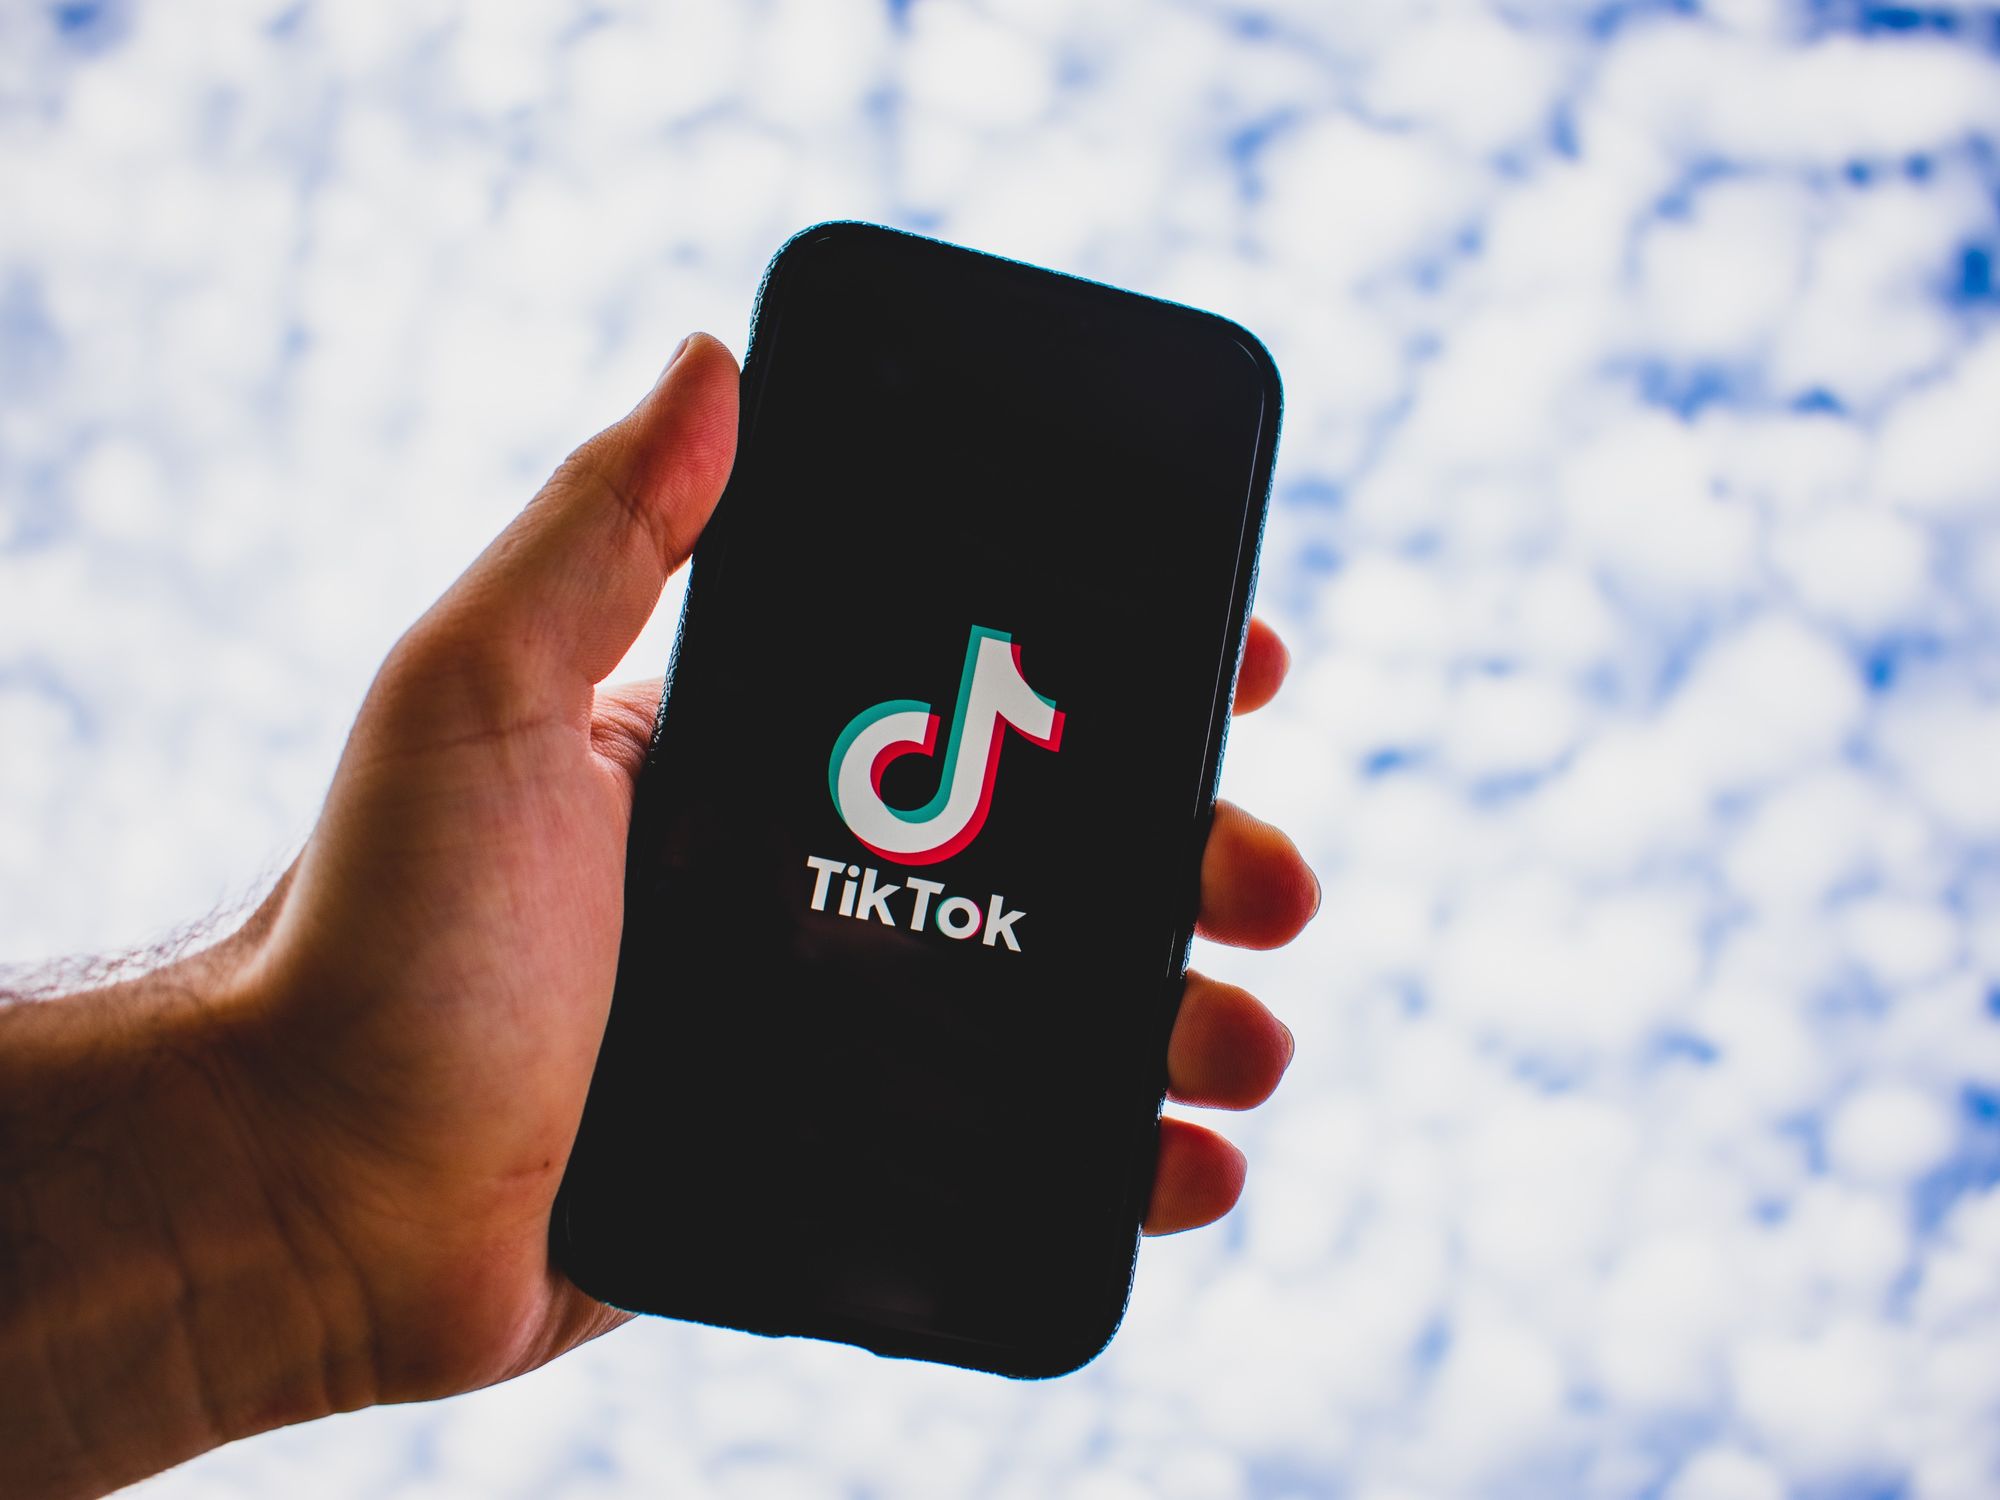 Reports: TikTok Plans IPO, Considers Instagram Co-Founder as CEO